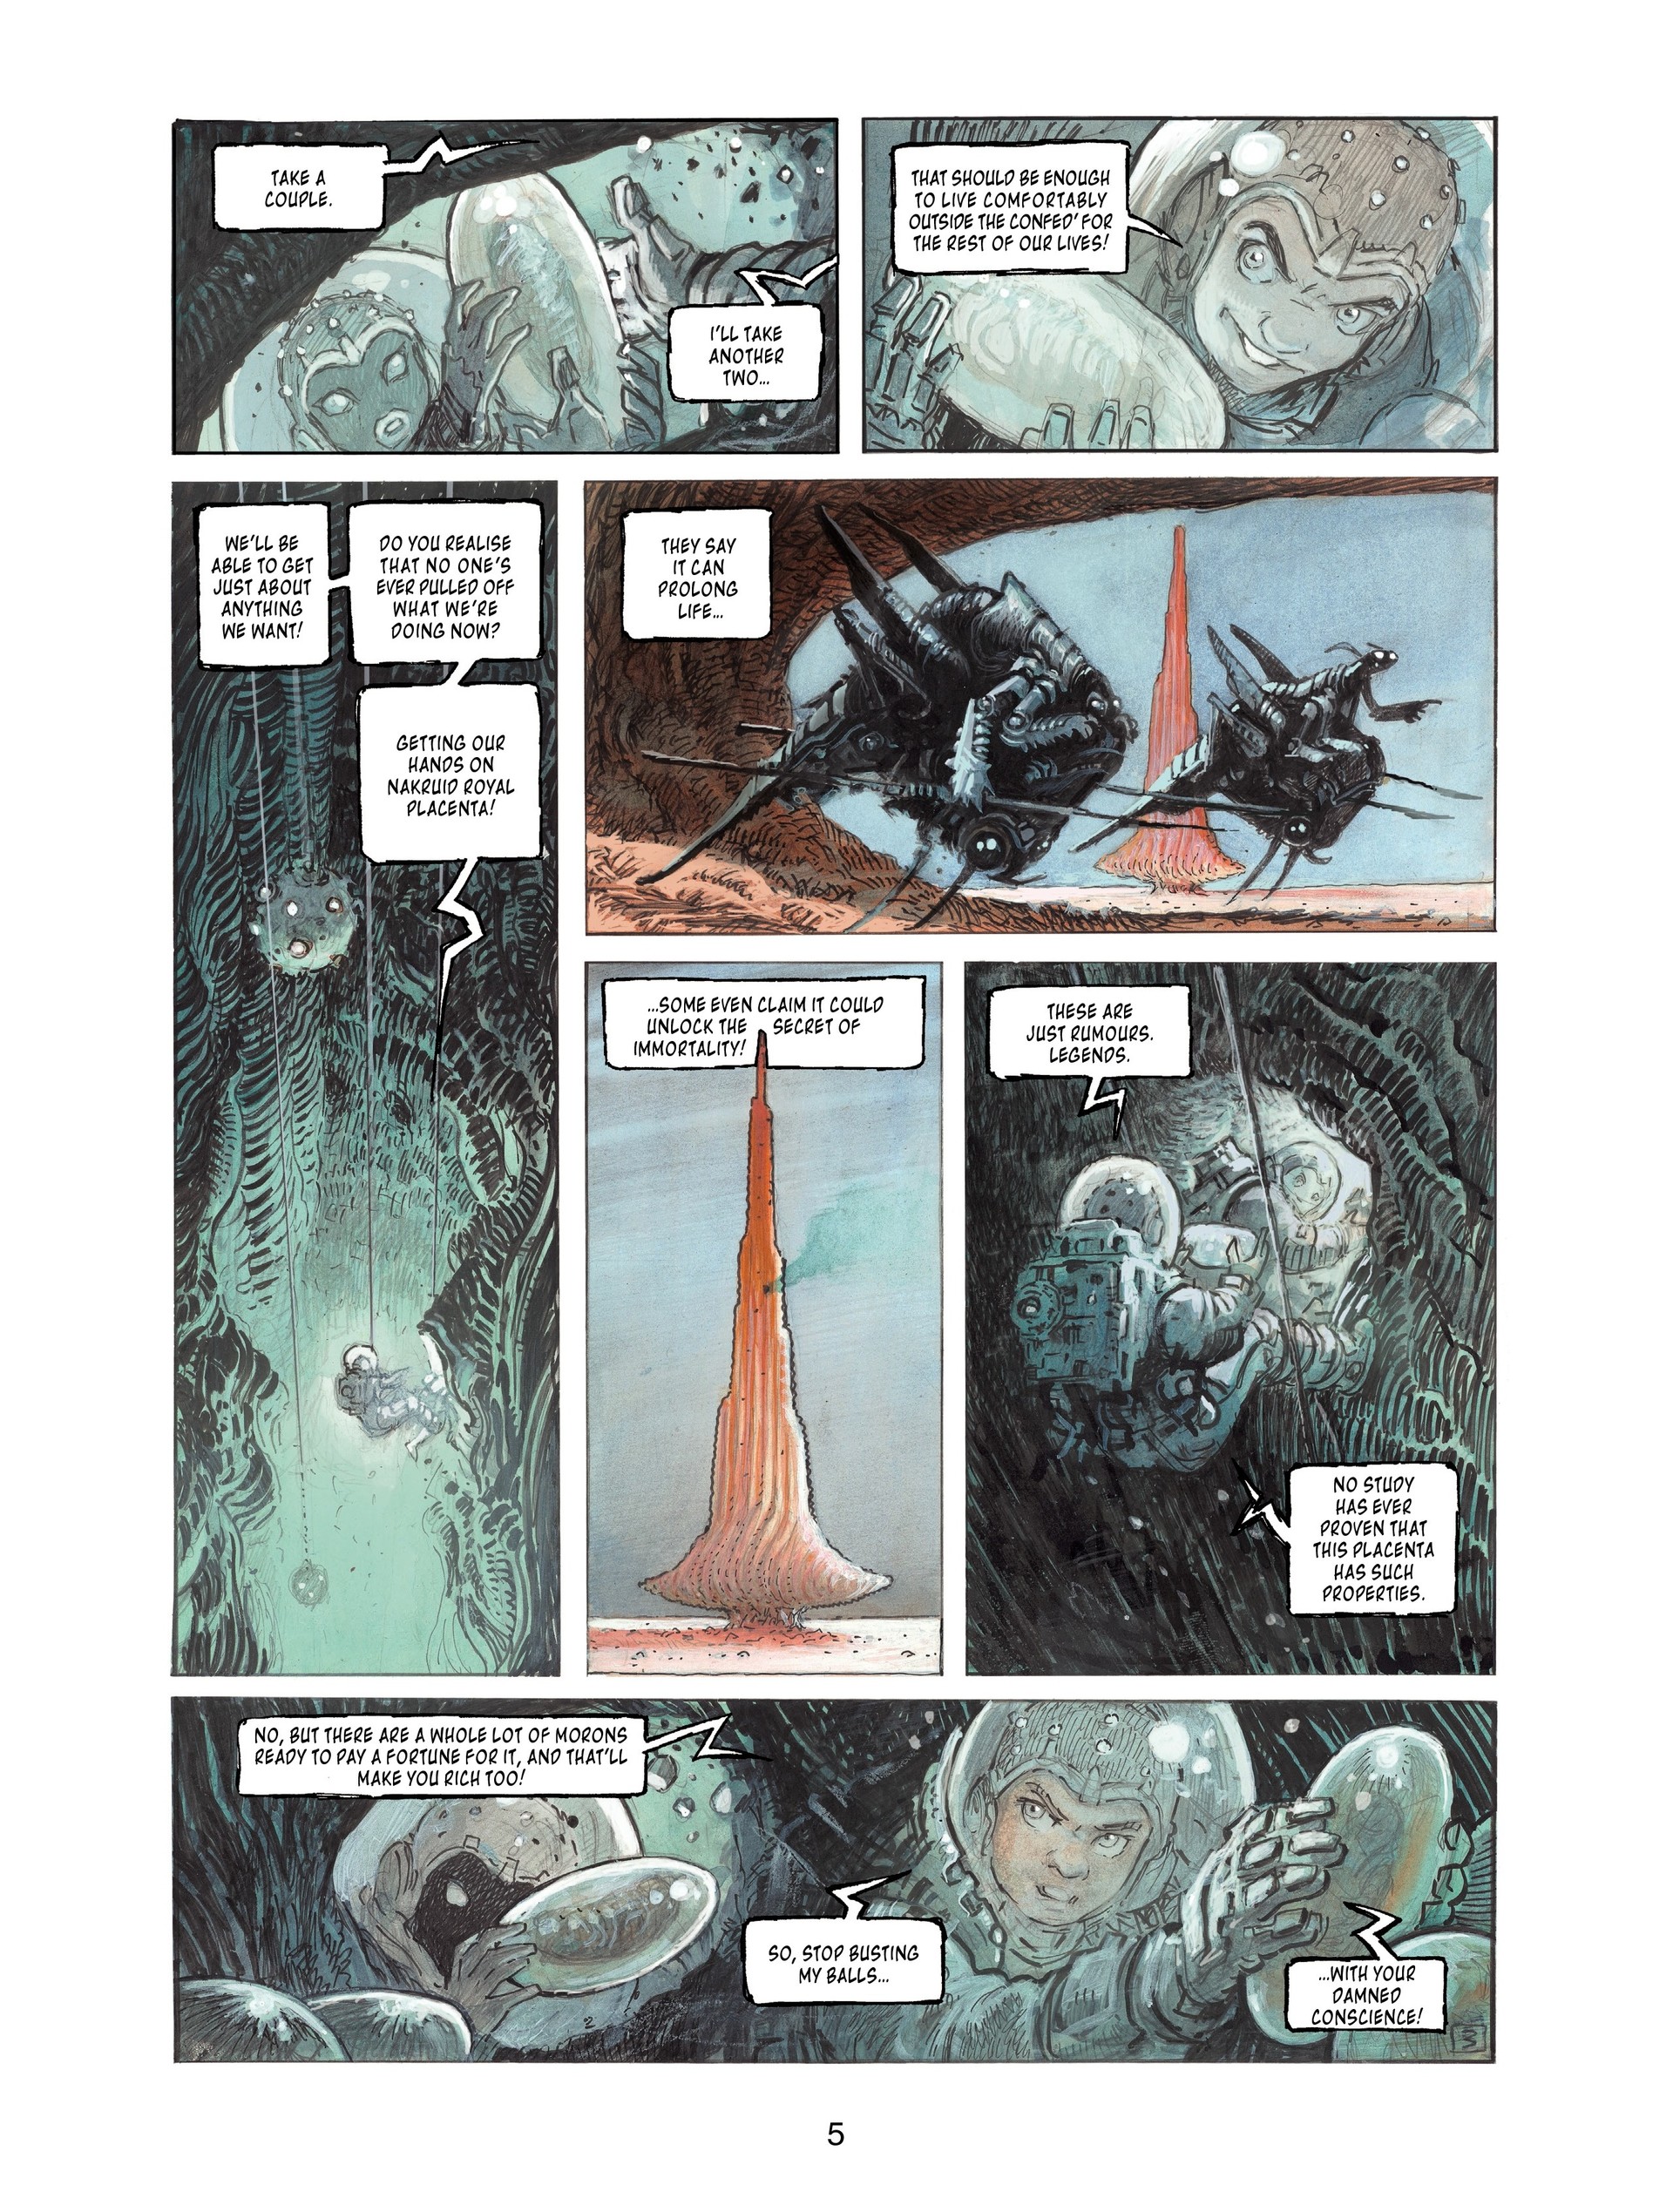 Orbital (2009-): Chapter 7 - Page 6